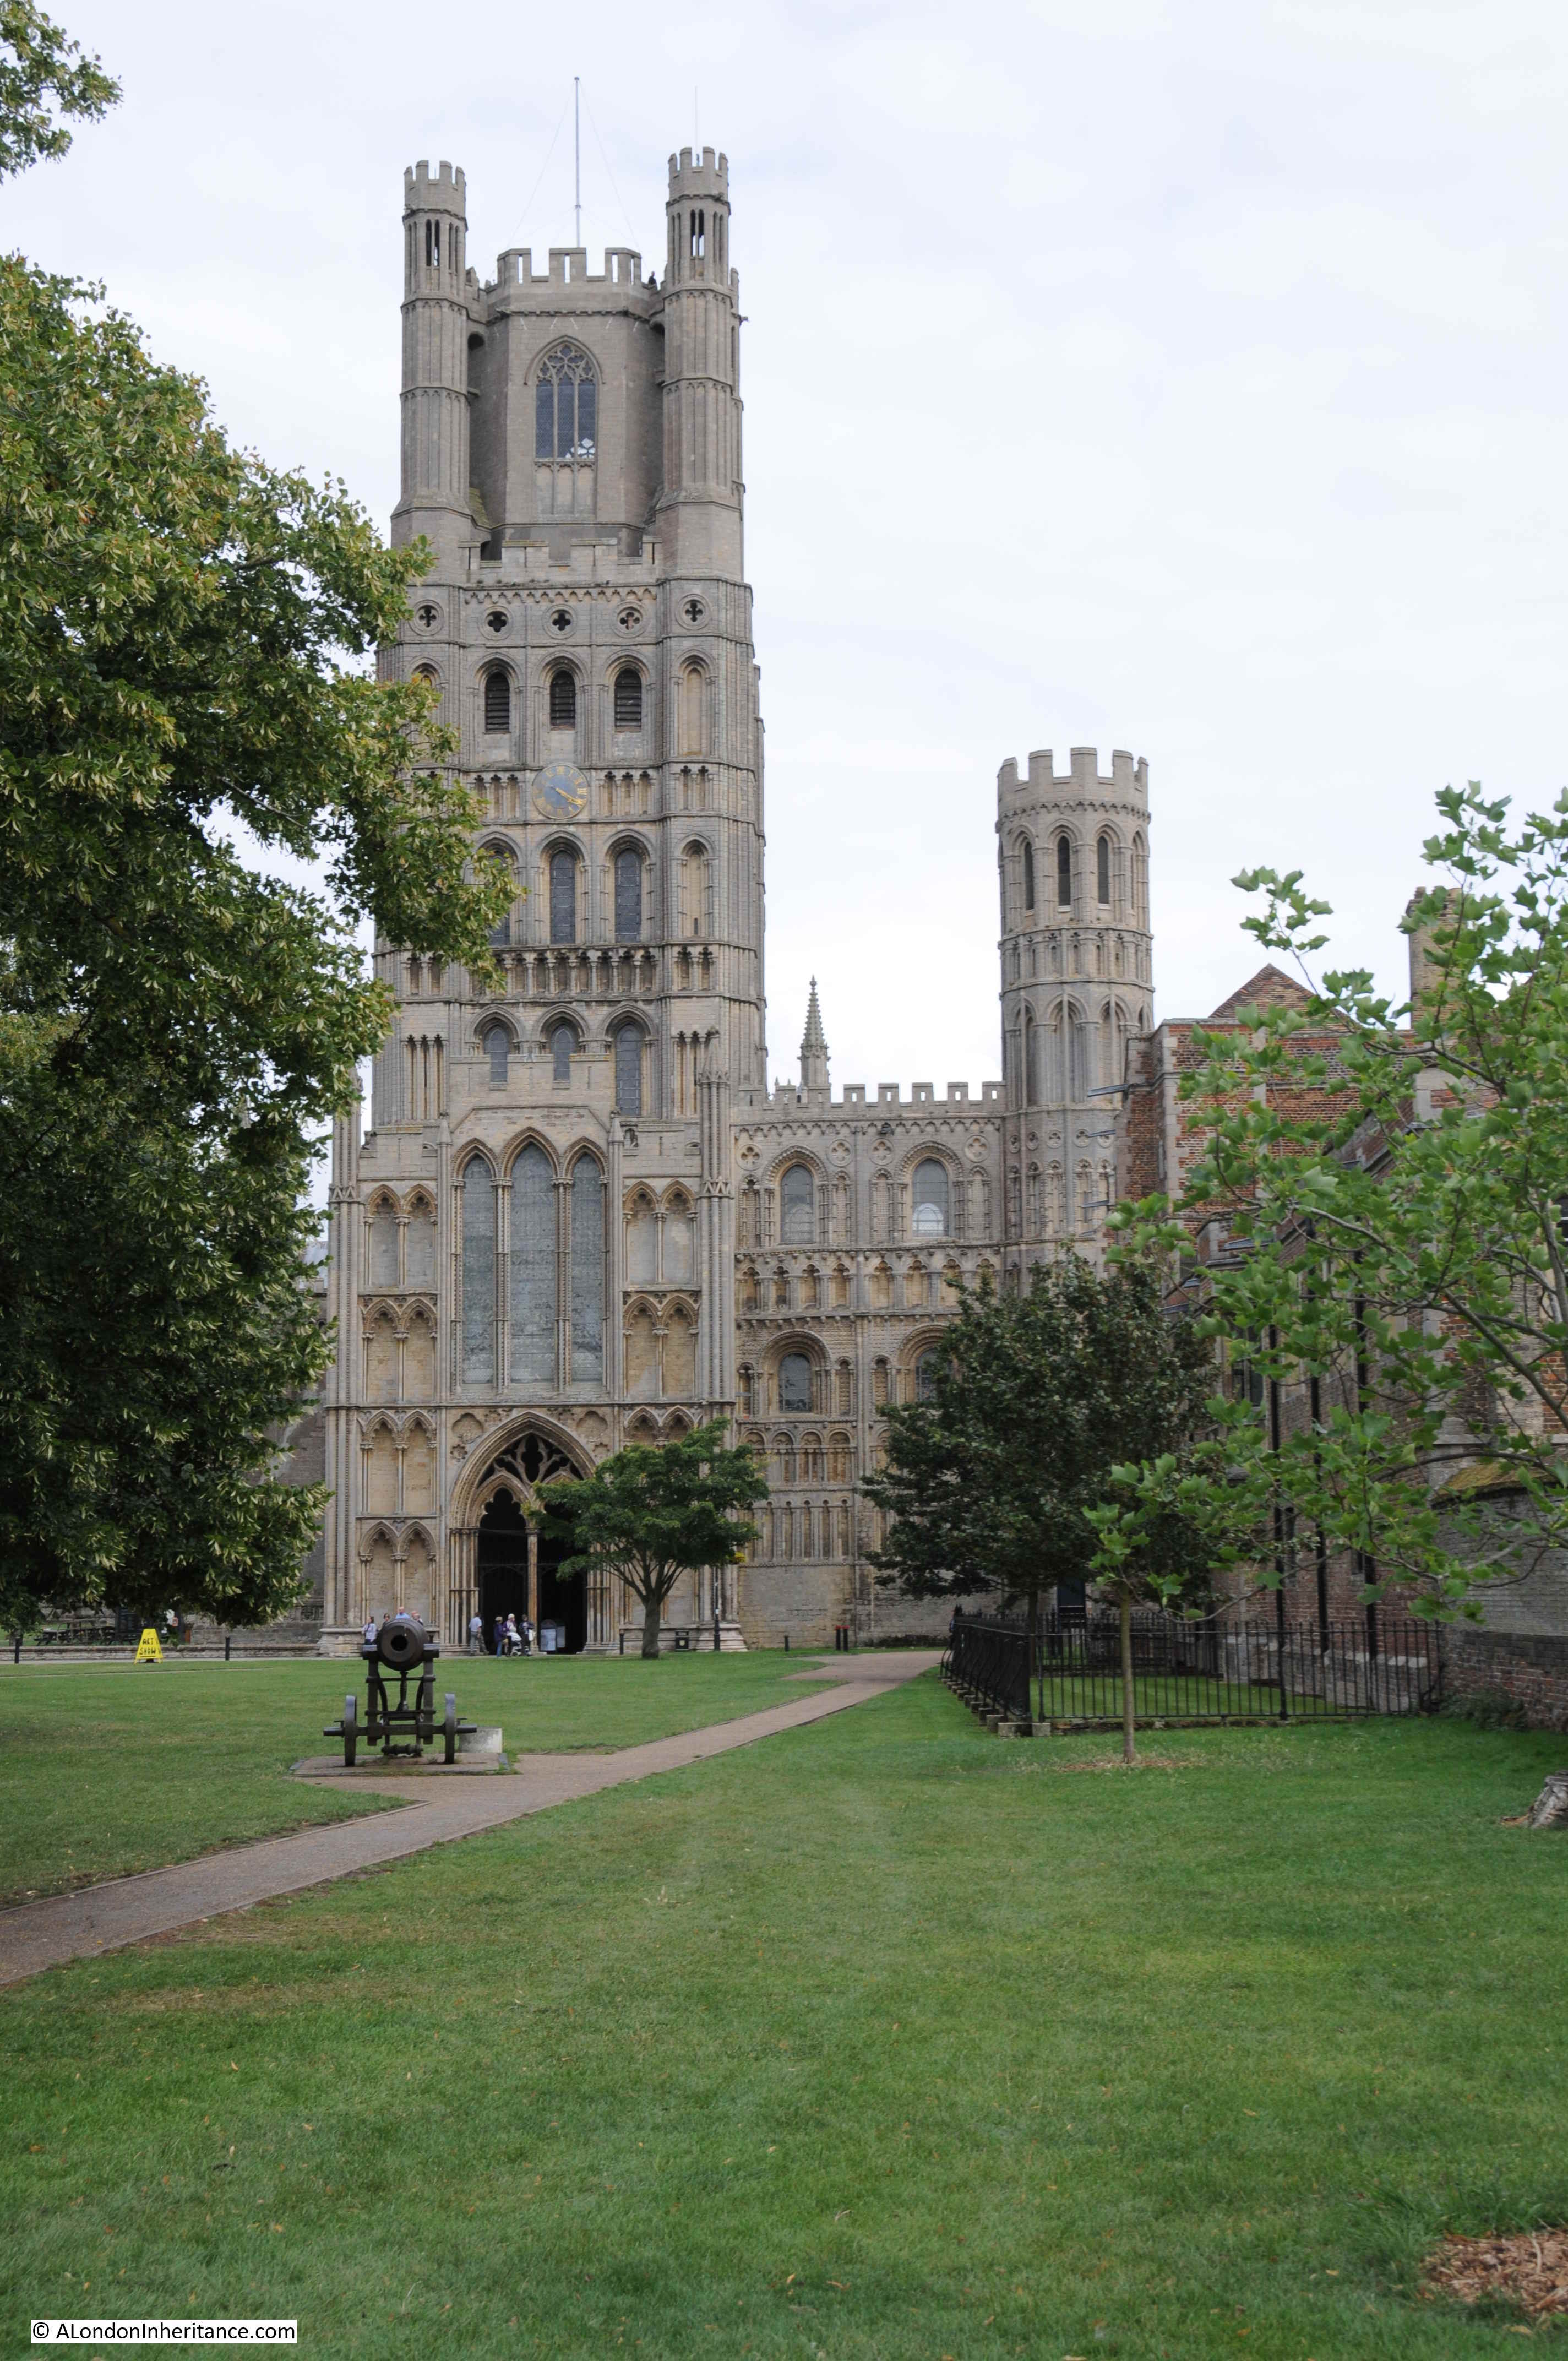 Ely Cathedral Wallpapers